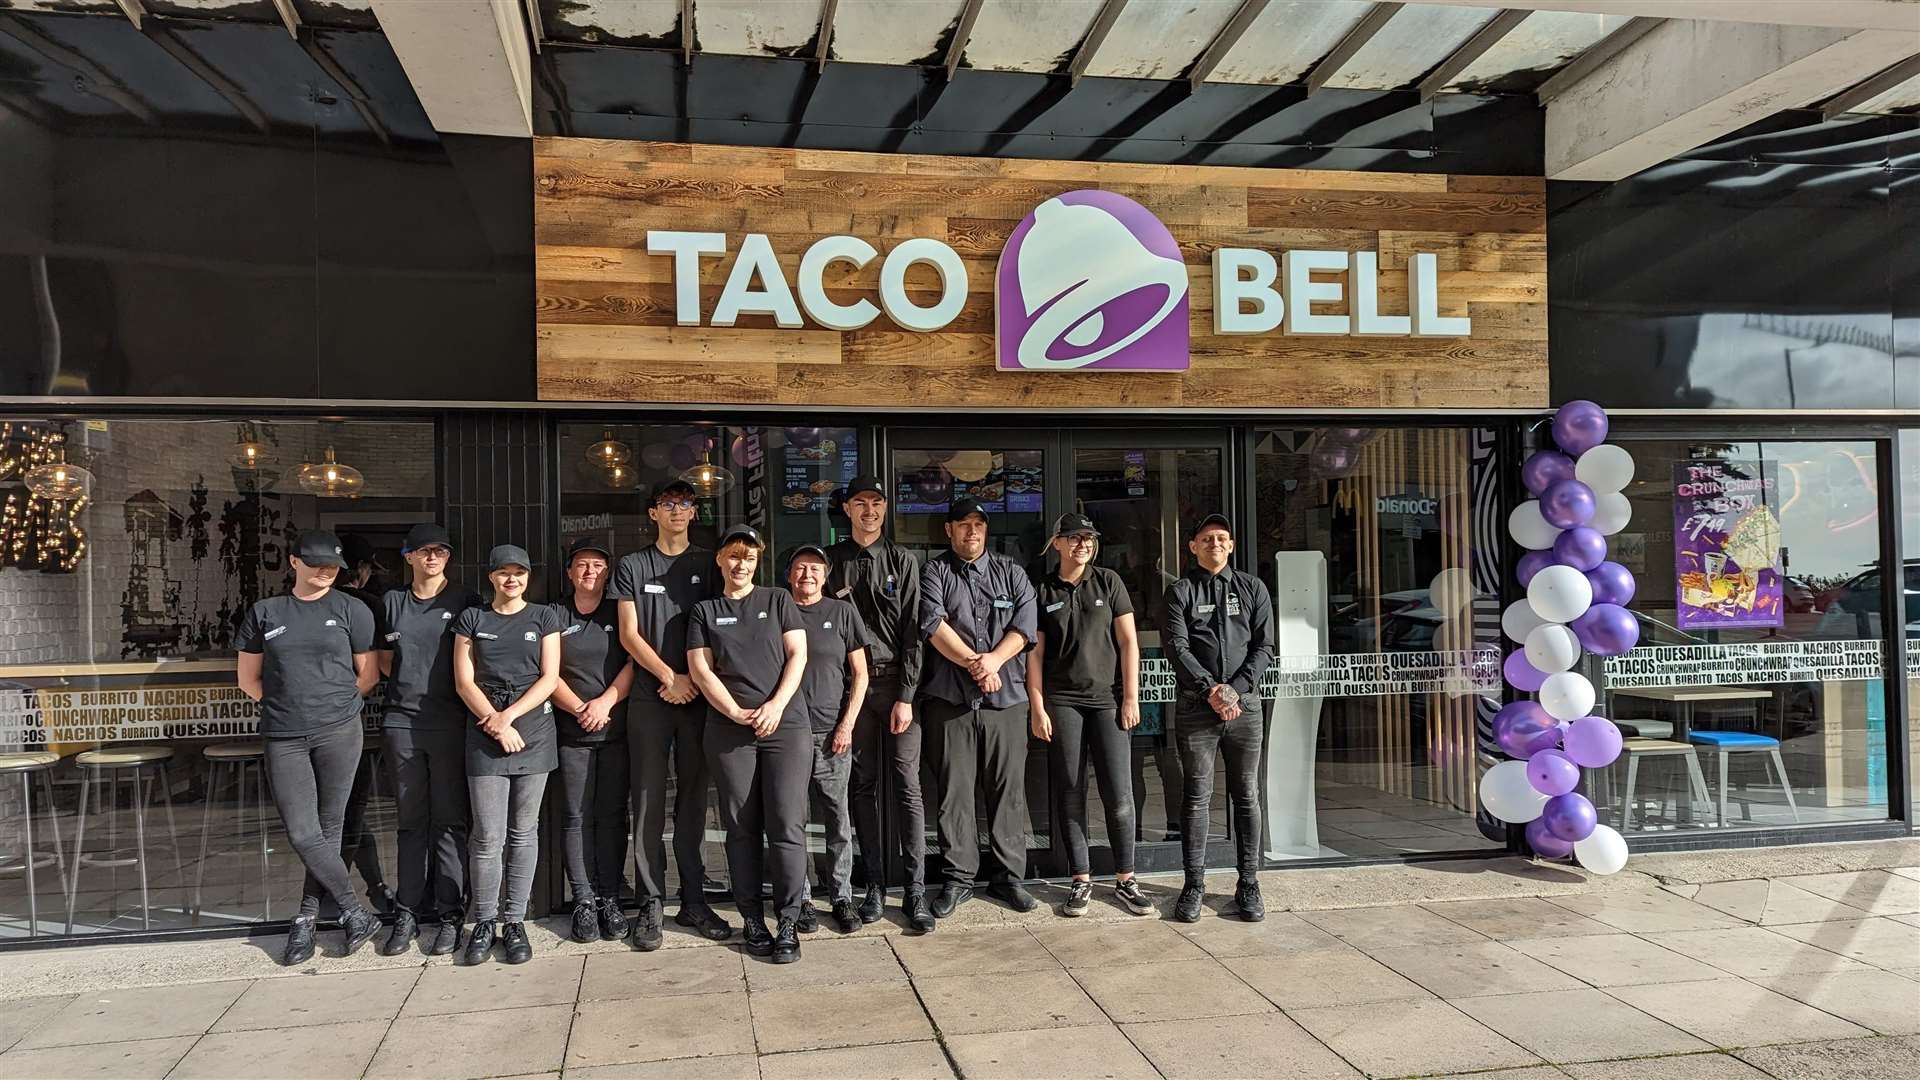 Taco Bell staff outside the new branch in West Terrace, Folkestone, opposite the town's long-established McDonald's